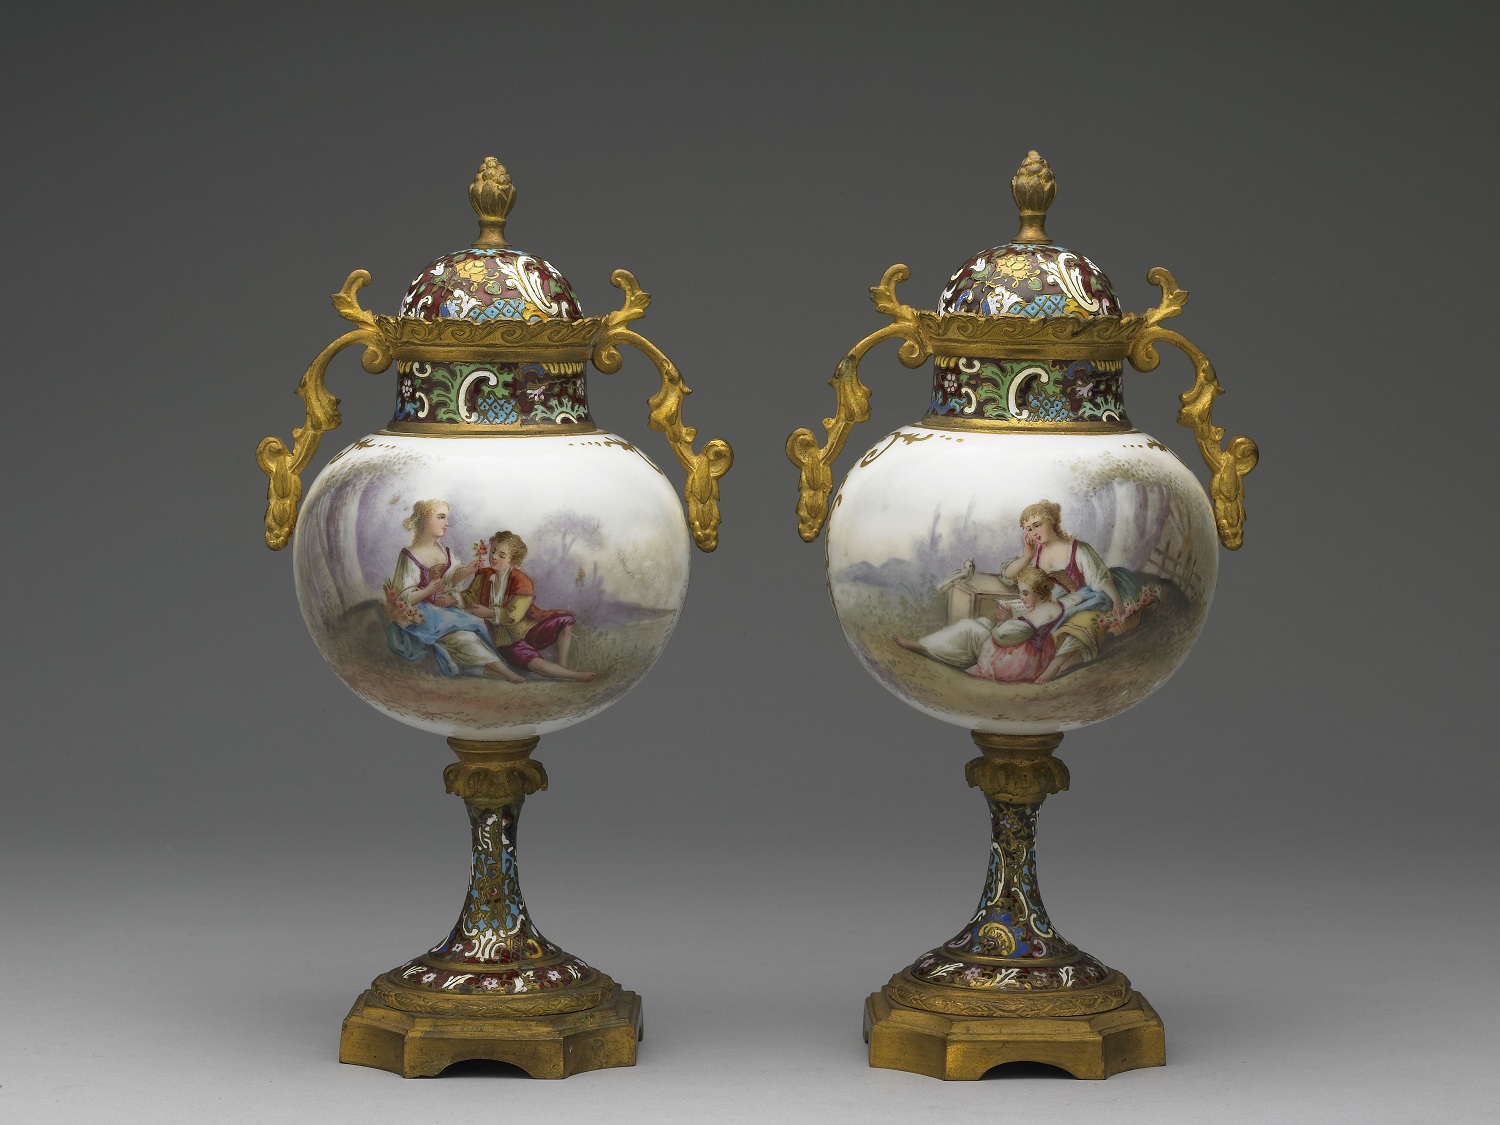 Pair of urns with painted enamel decoration of Western figures on porcelain